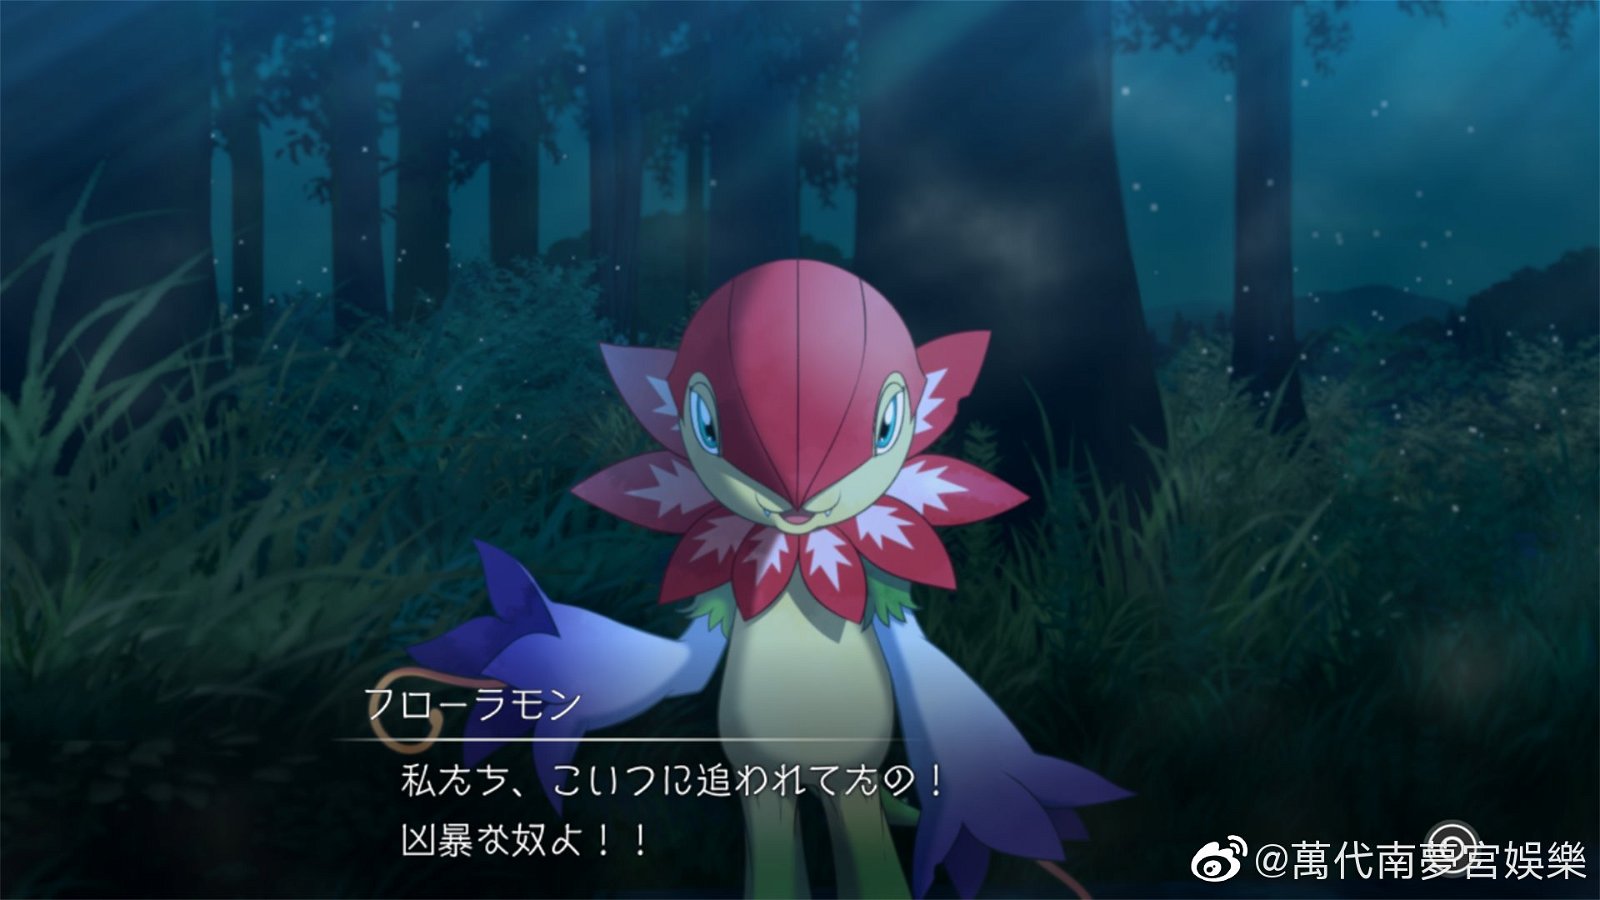 digimon survive, bandai namco entertainment, witchcraft, us, north america, release date, gameplay, features, price, pre-order, ps4, playstation 4, switch, nintendo switch, xone, xbox one, game system, new screenshots, update, news